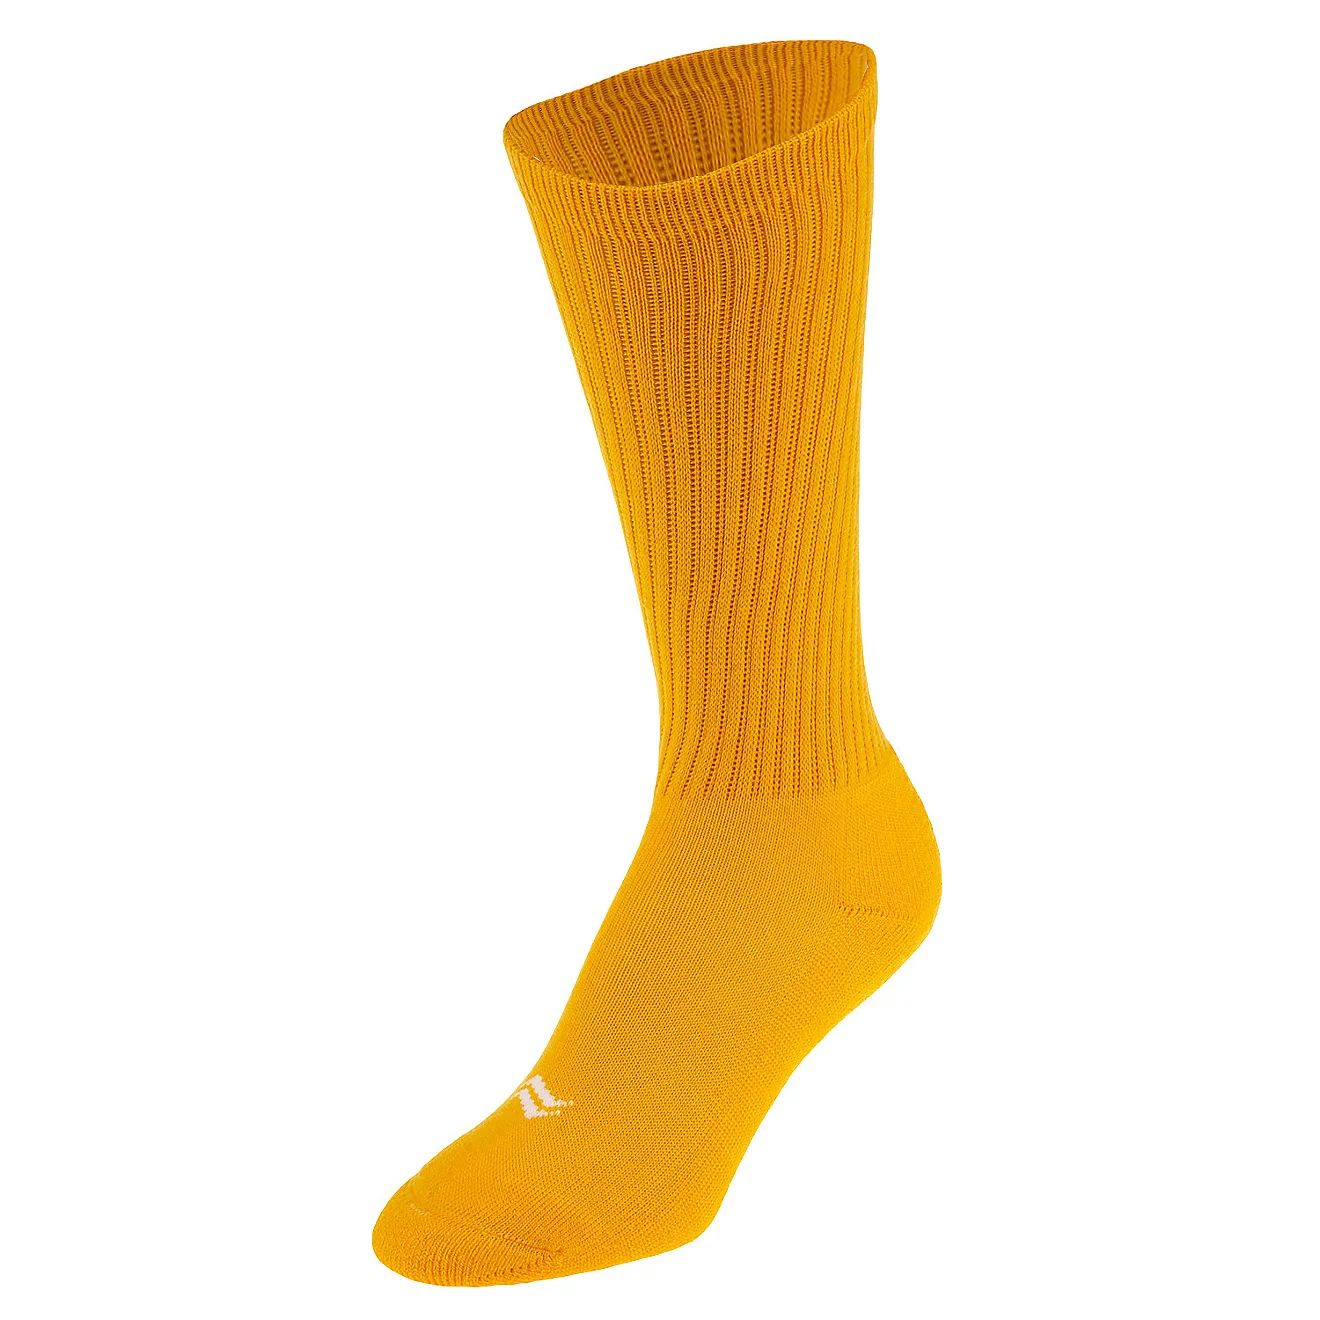 Sof Sole Soccer Kids' Performance Socks X-Small 2 Pack | Academy | Academy Sports + Outdoors